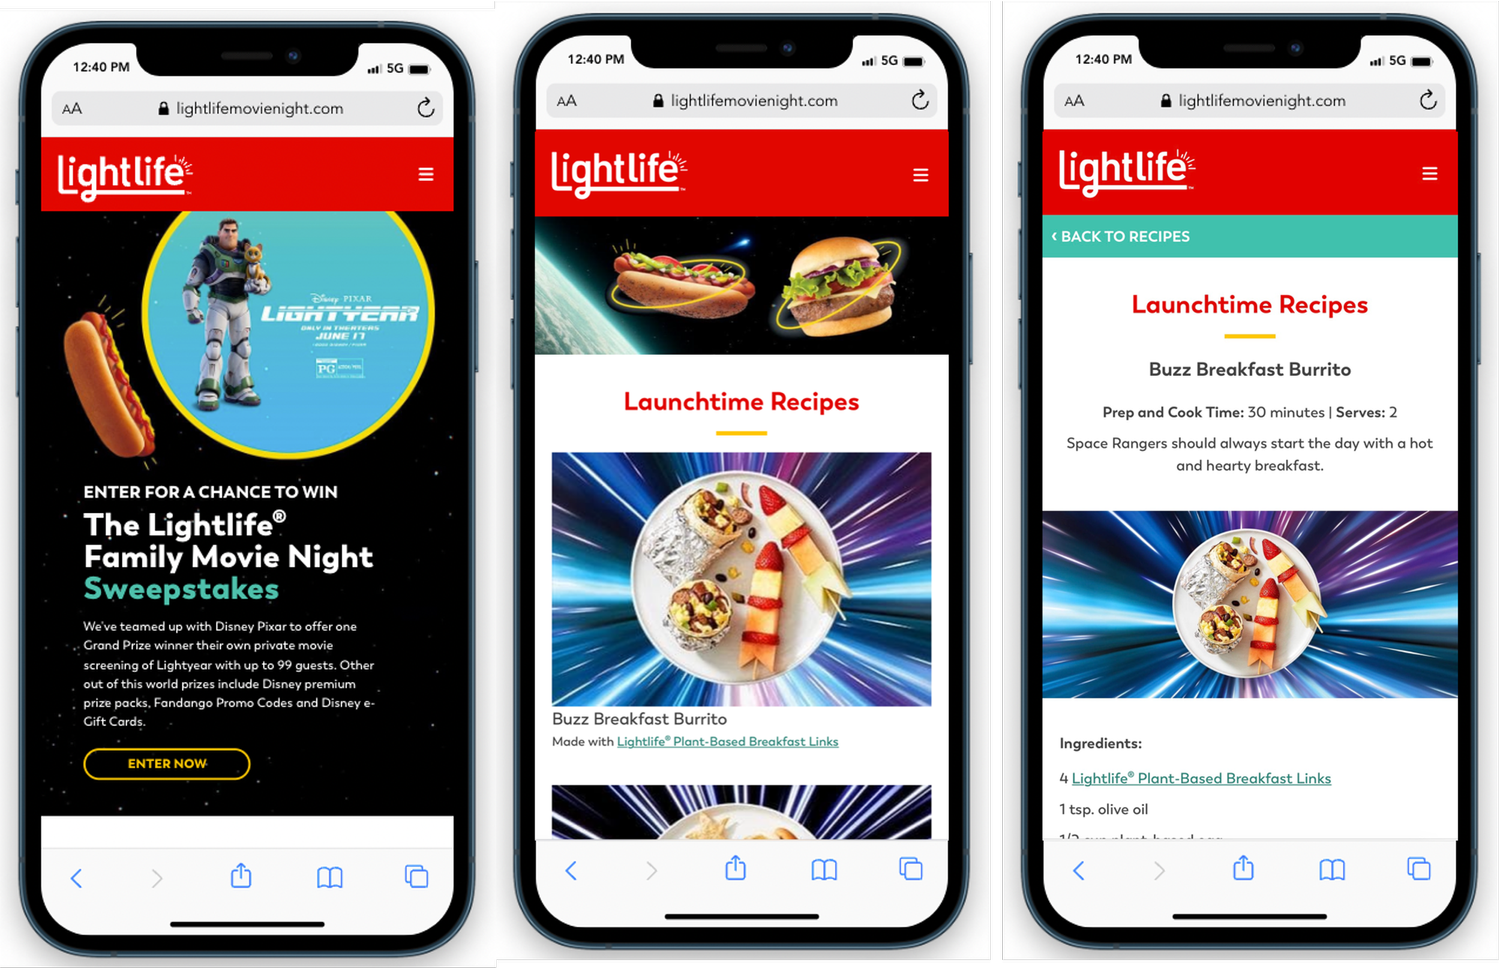 This unique sweepstakes drove sales of Lightlife products with a high profile incentive and various prize packages. Custom recipe content, tied to the partnership, was developed to inspire new usage of the products.